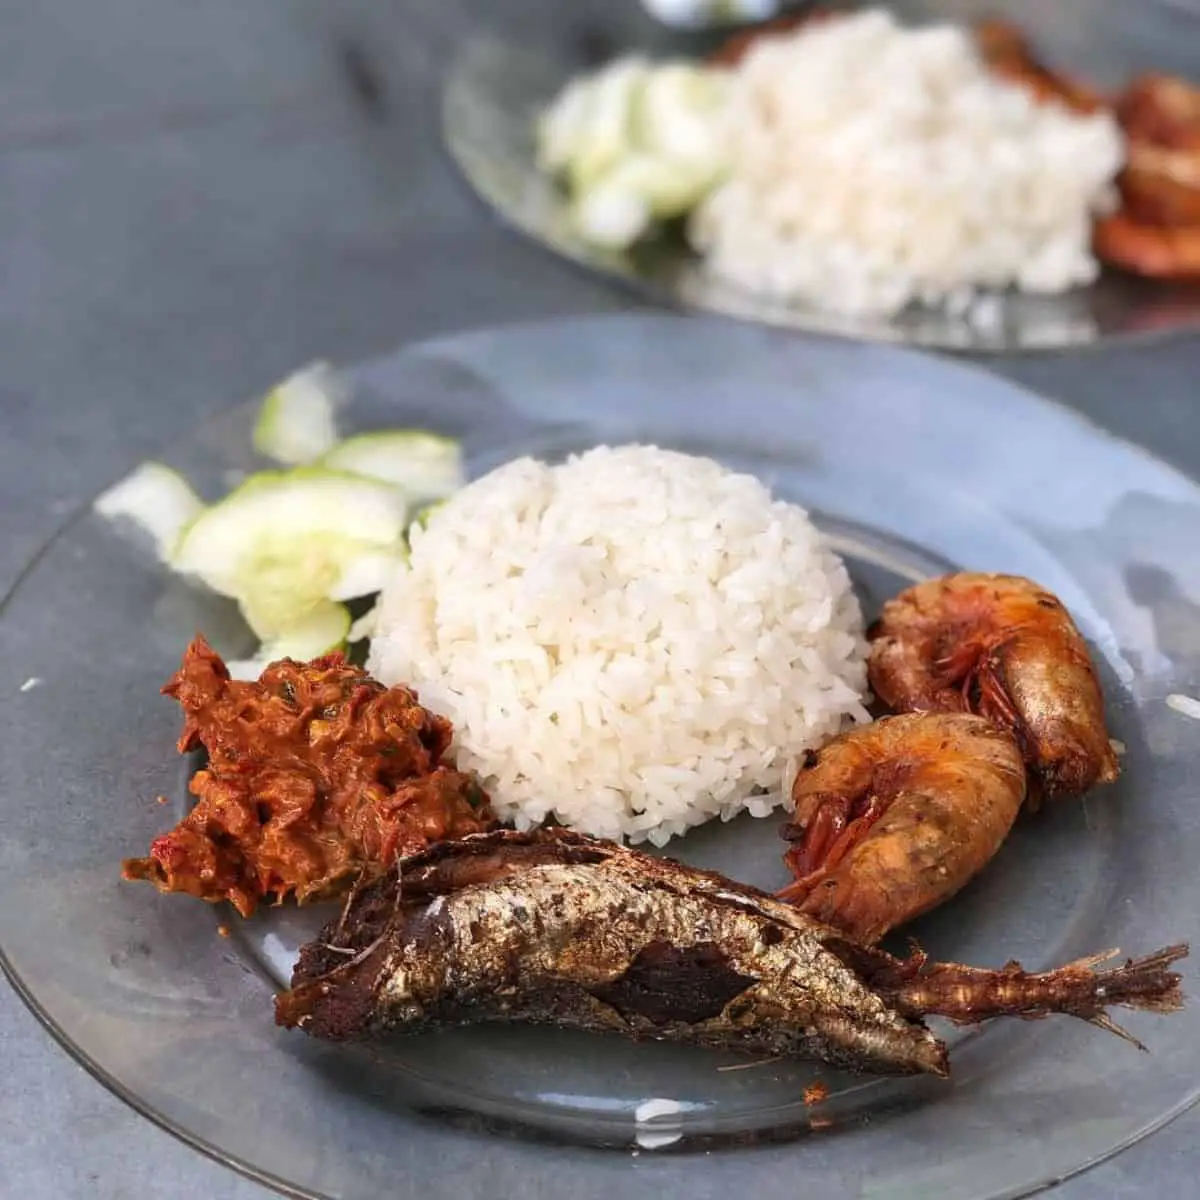 Jin Hoes Nyonya version of Nasi Lemak with fried fish, shrimp and sliced cucumber